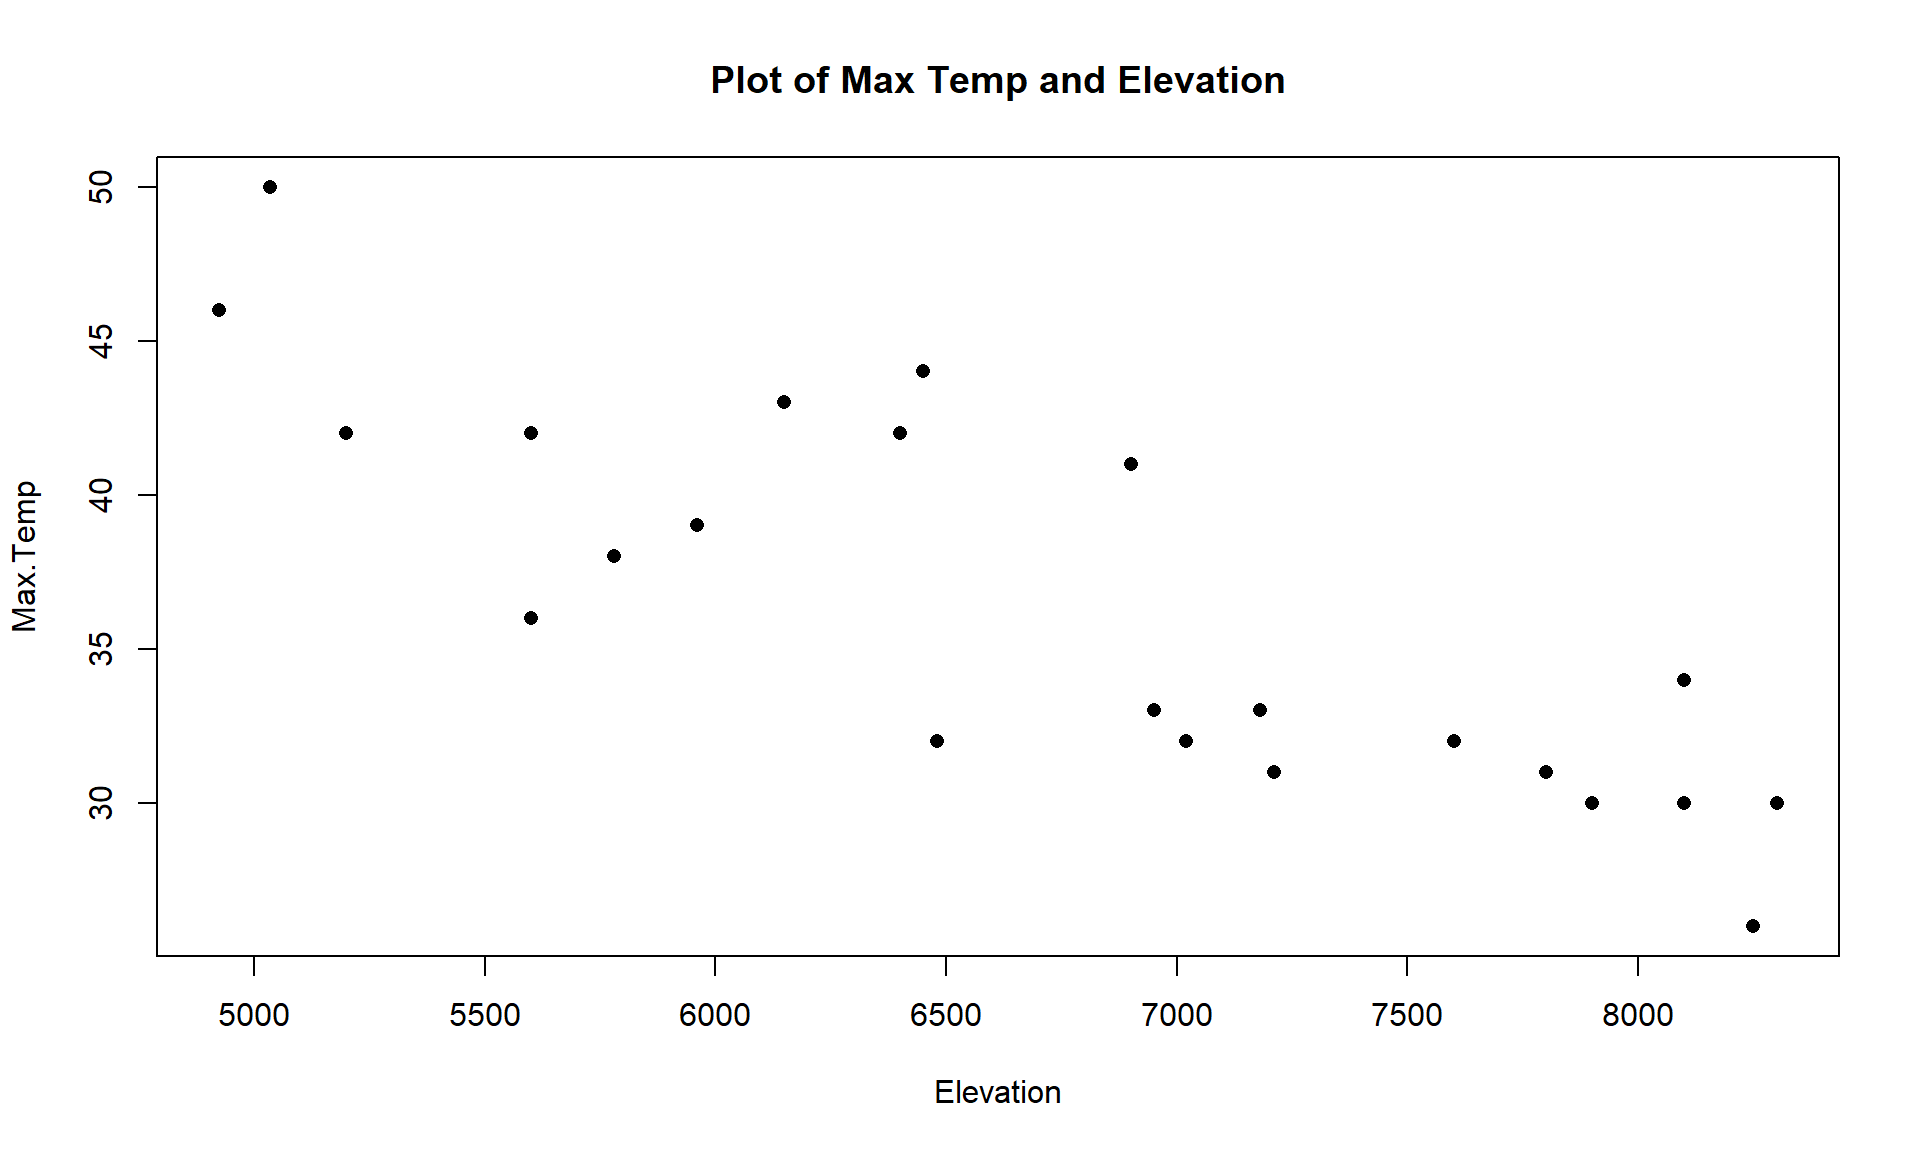 Scatterplot of observed Elevations and Maximum Temperatures for SNOTEL data.